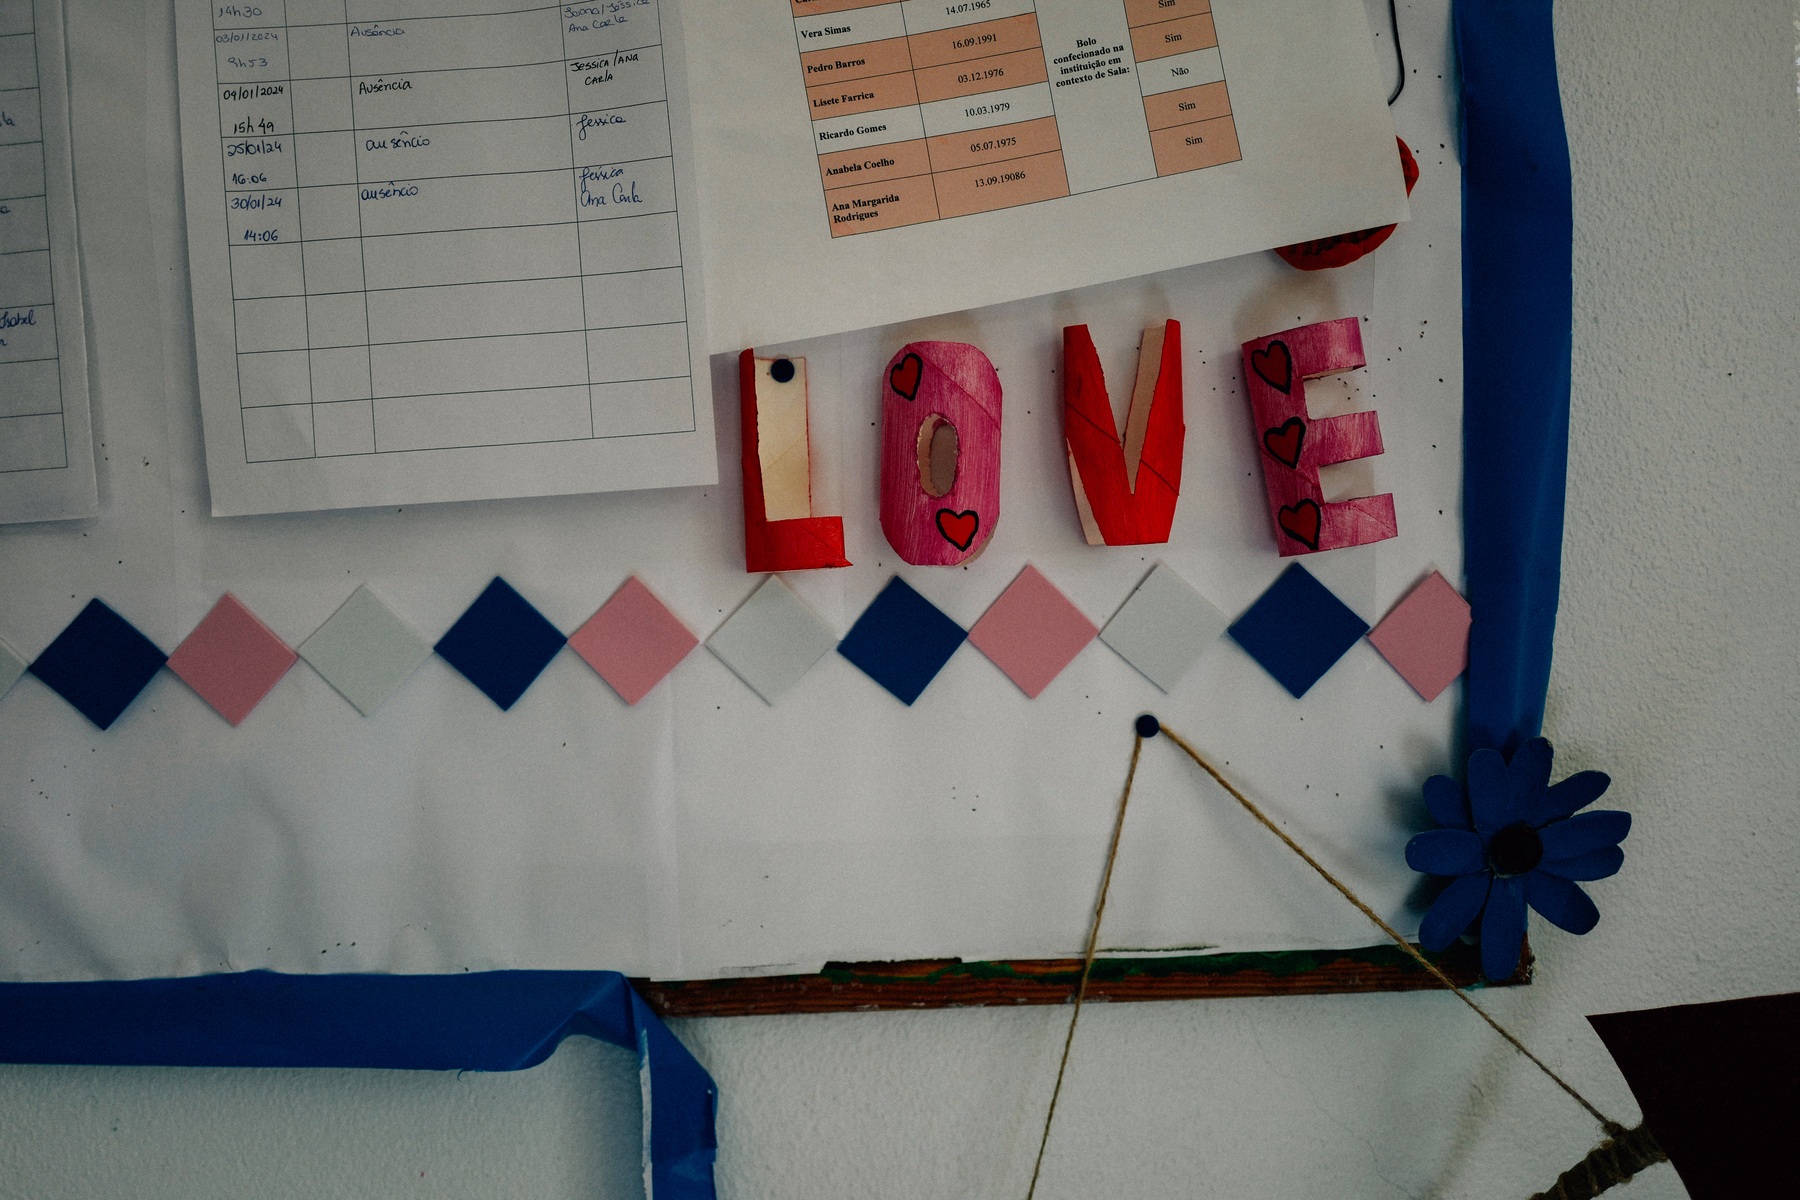 A wall with decorative elements and papers. The word &ldquo;LOVE&rdquo; in colorful painted letters, a blue paper flower, diamond-shaped paper cutouts in pink and blue, and charts with handwritten text.